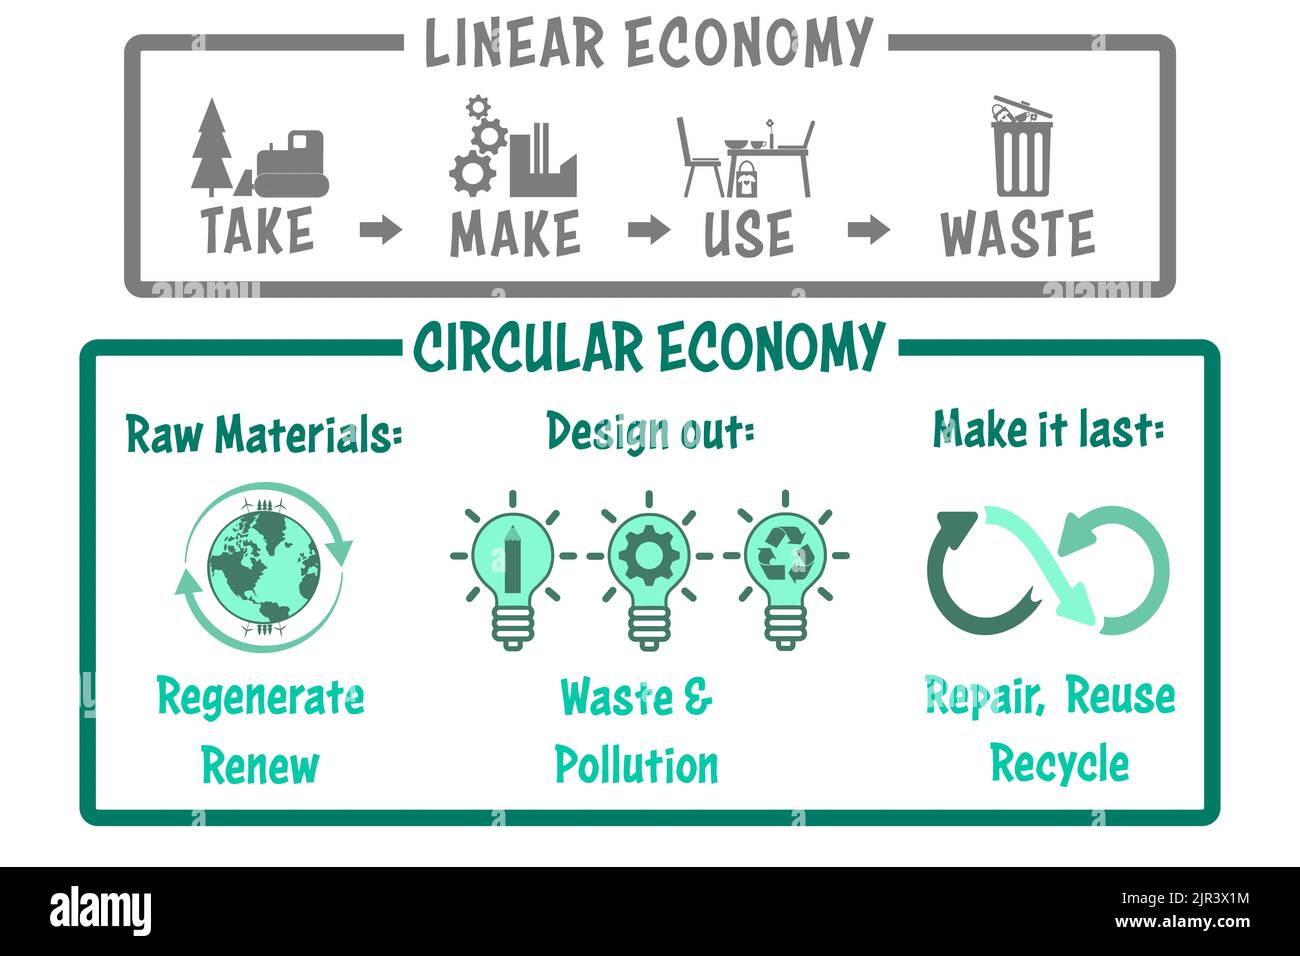 Linear and Circular Economy illustrated, regenerative sustainable economy against take, make, use, waste, renewable resources, reuse, repair, recycle Stock Photo